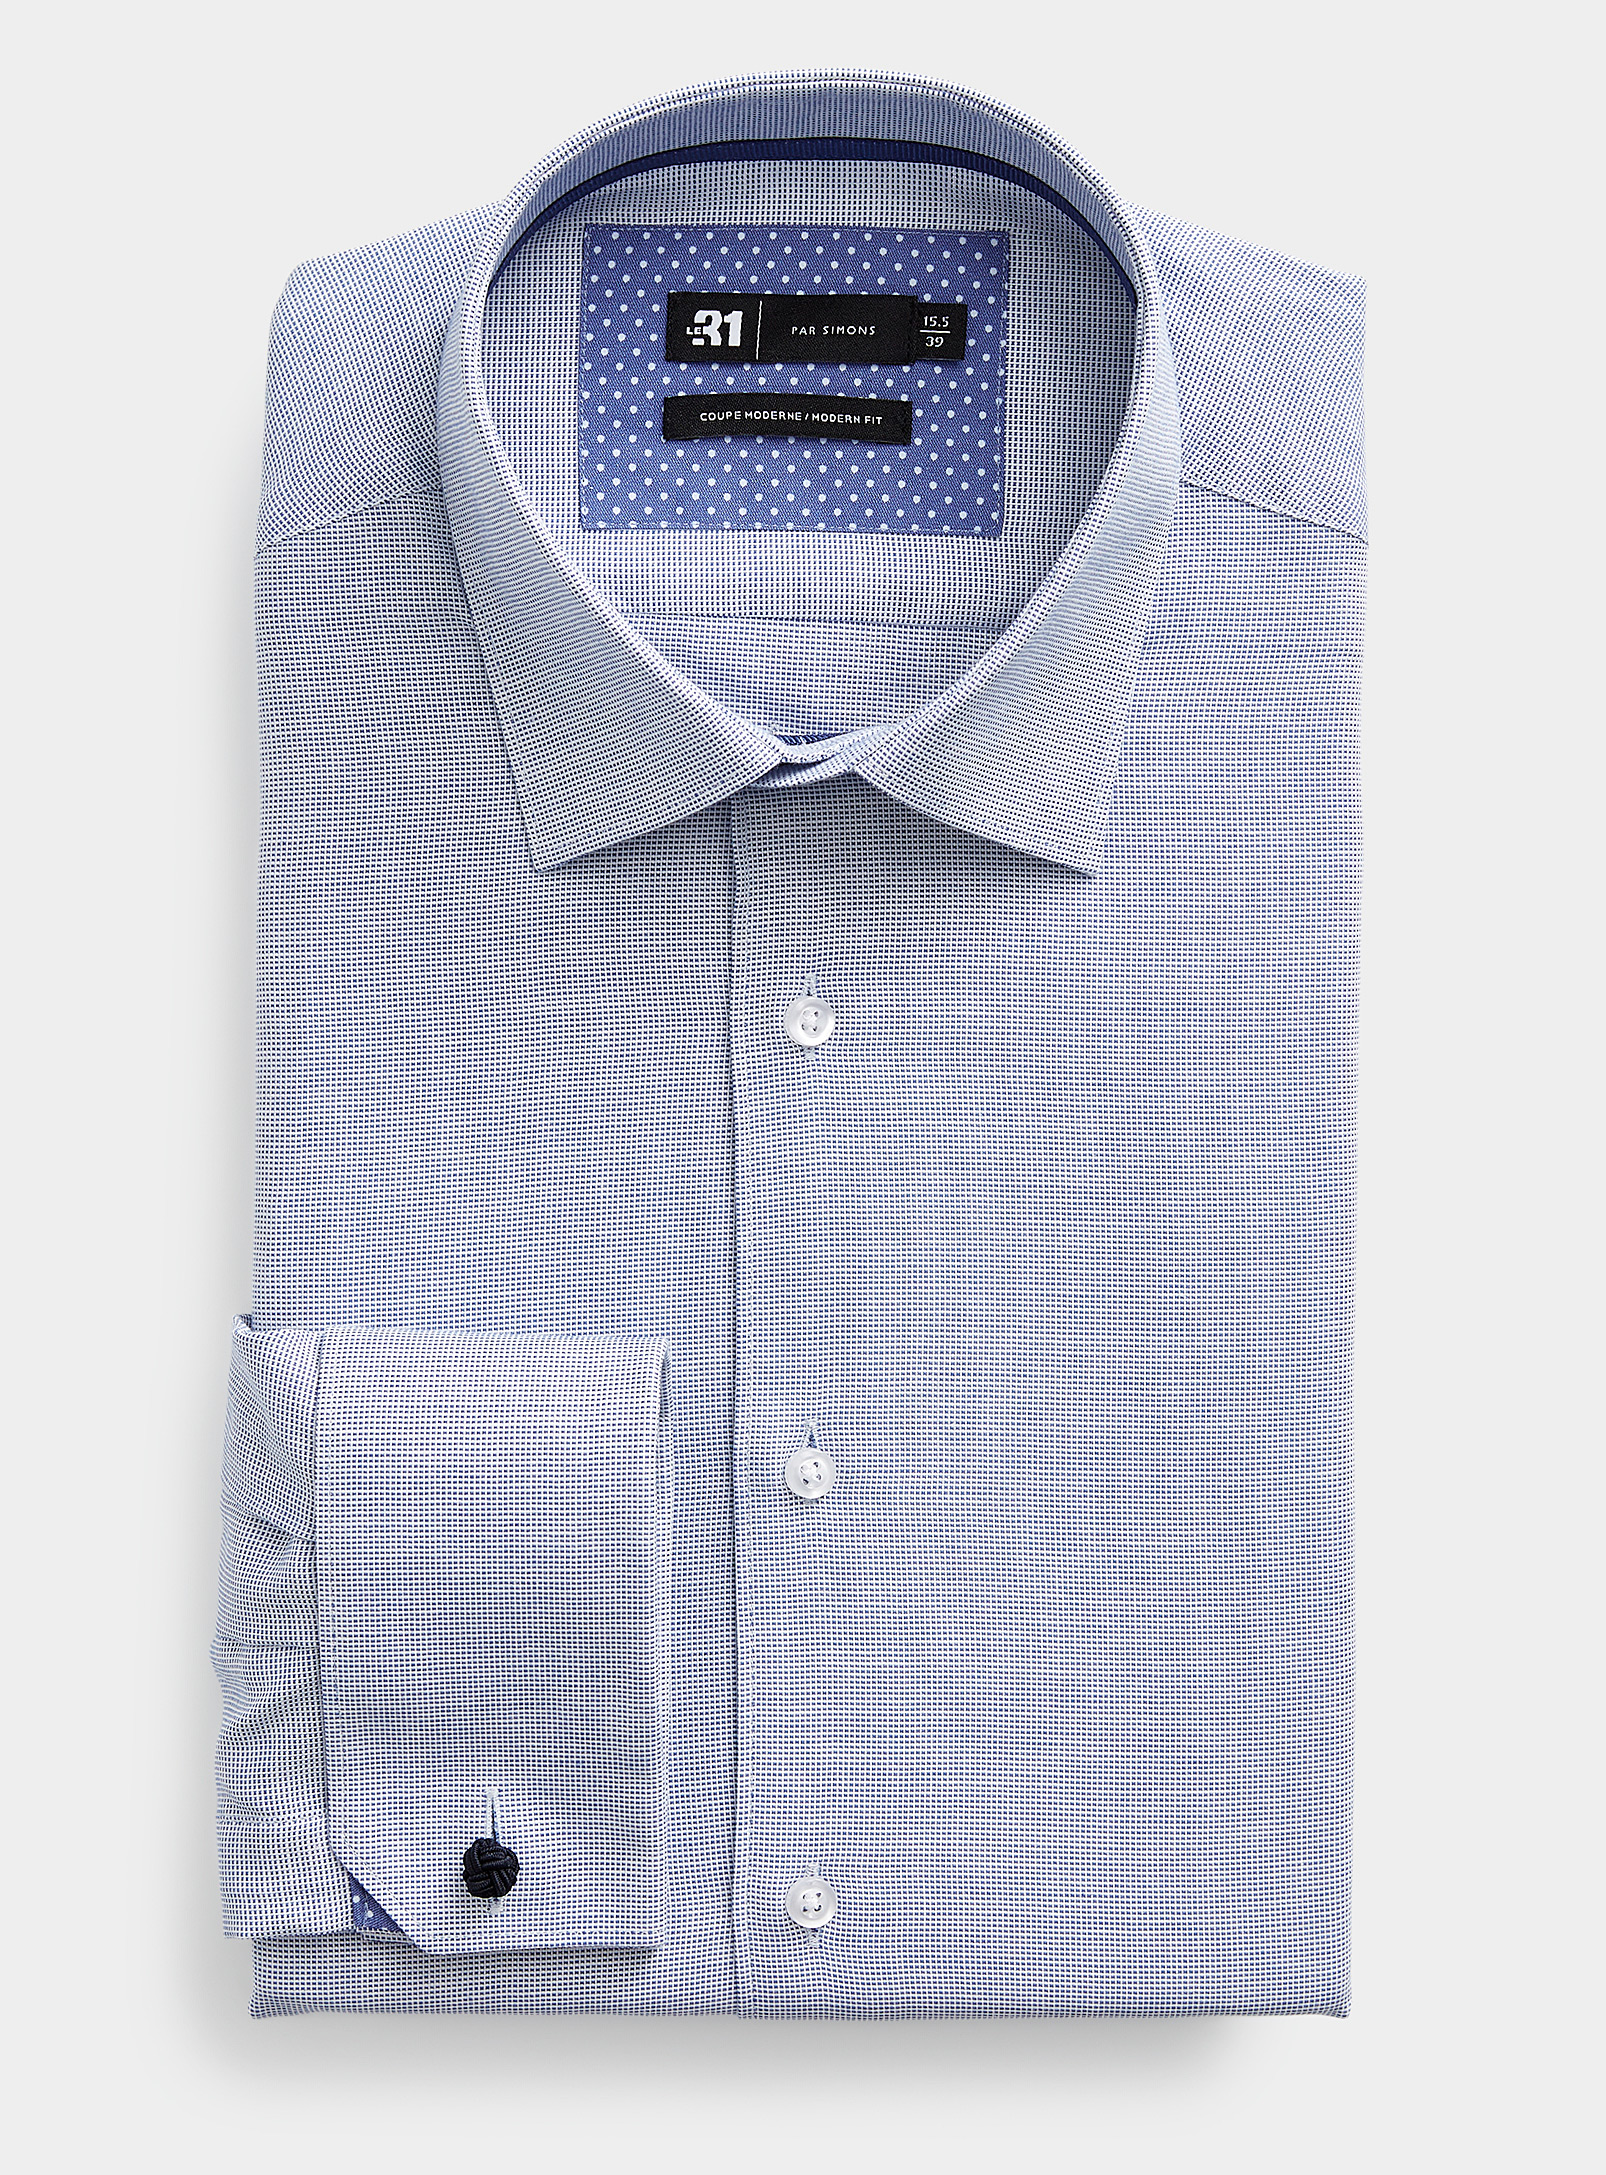 Le 31 Jacquard Micro-check Shirt Modern Fit In Baby Blue